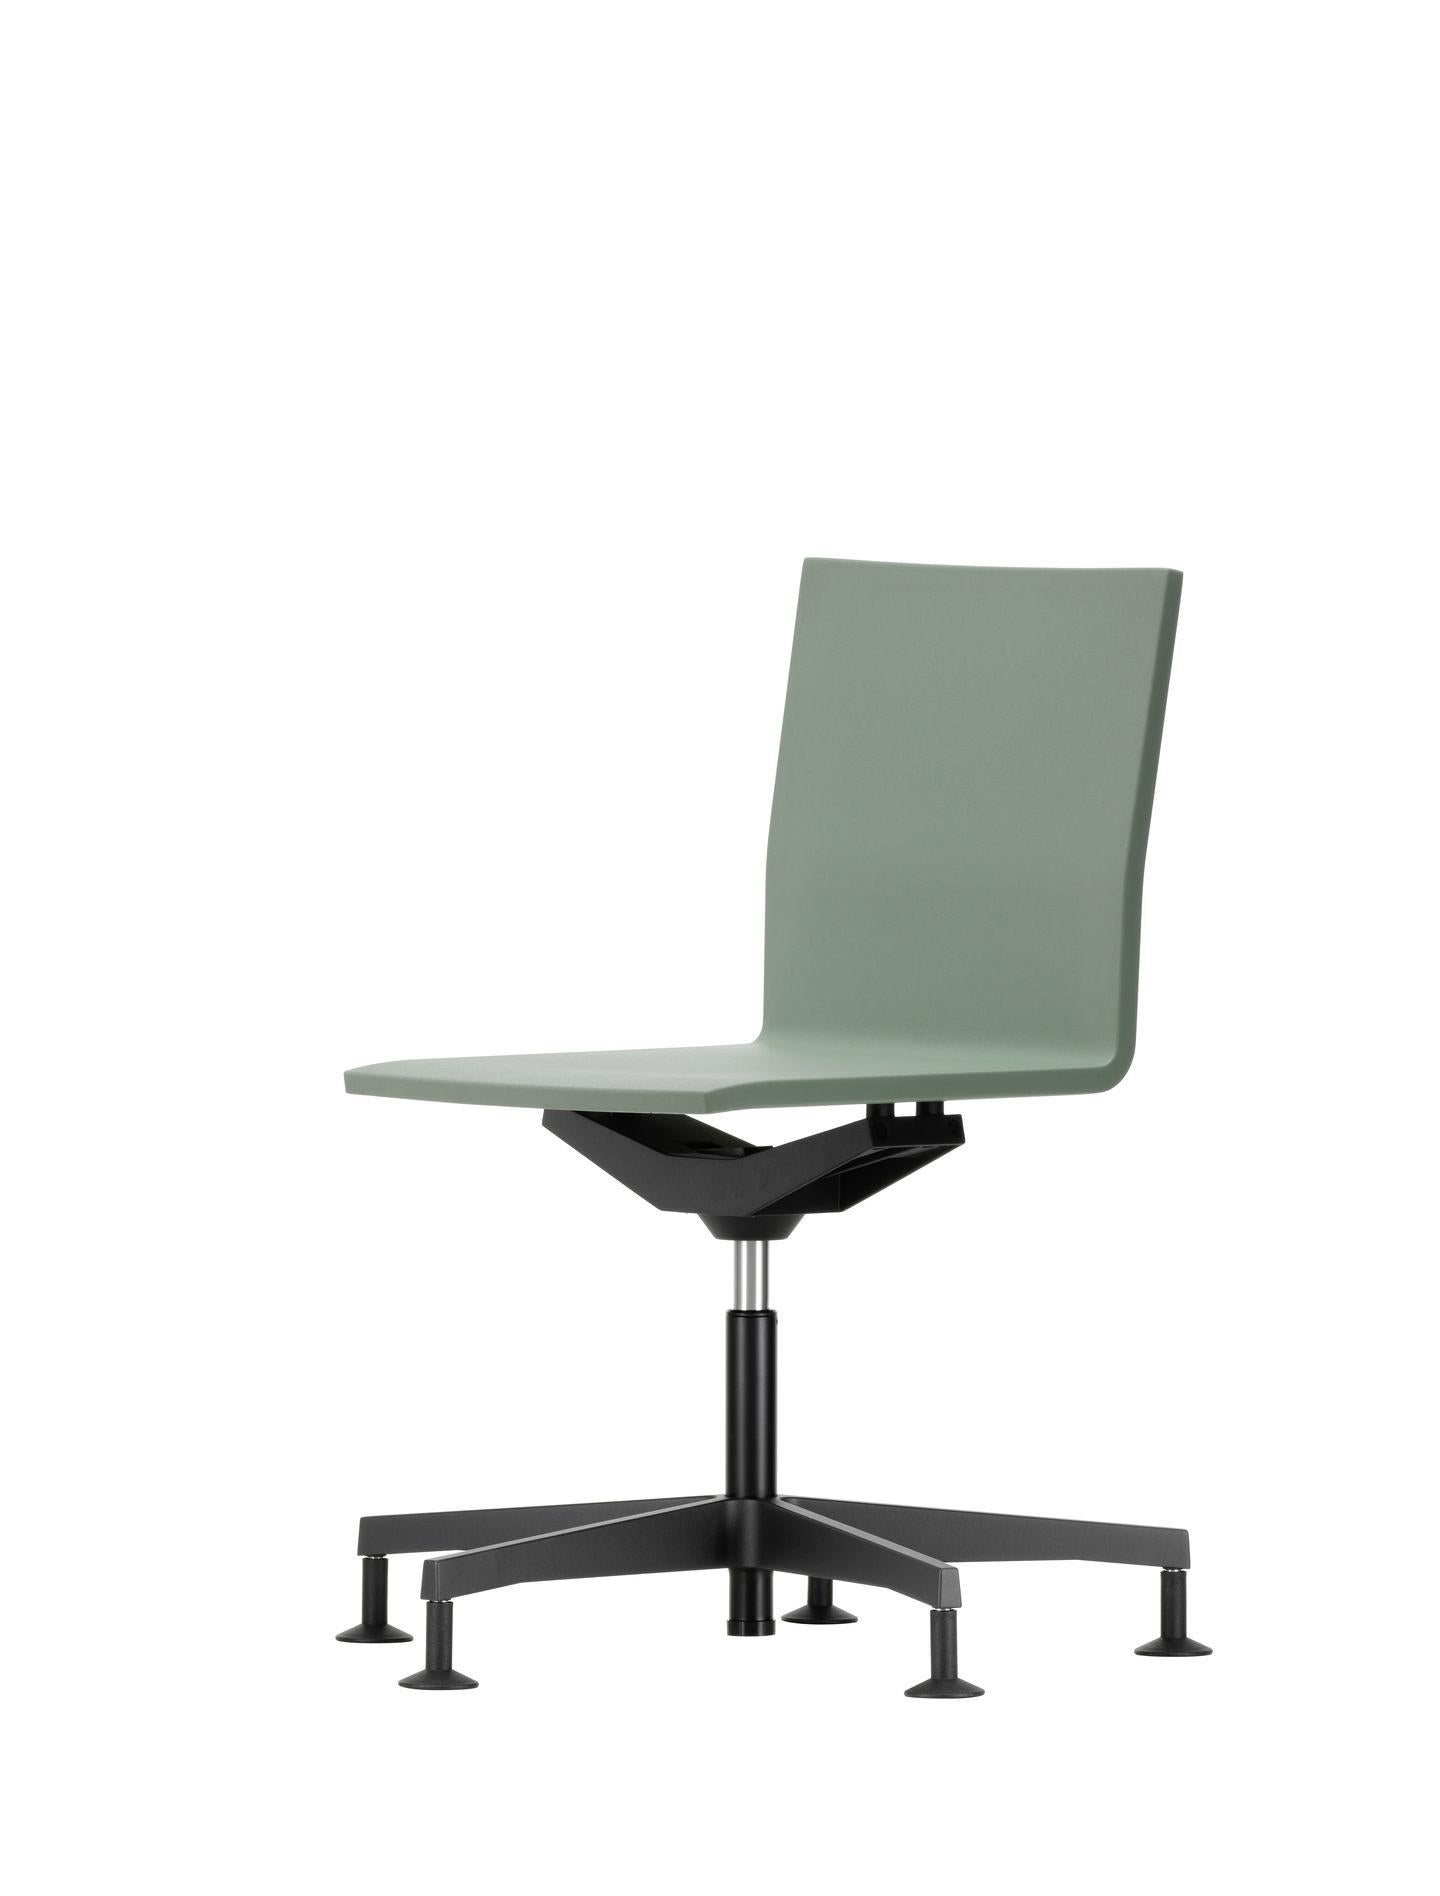 Office chair designed by Maarten van Severen in 2000.
Manufactured by Vitra, Switzerland.

The unobtrusive design of the .04 office chair makes it a perfect choice for home offices. It is distinctly different in appearance from typical task